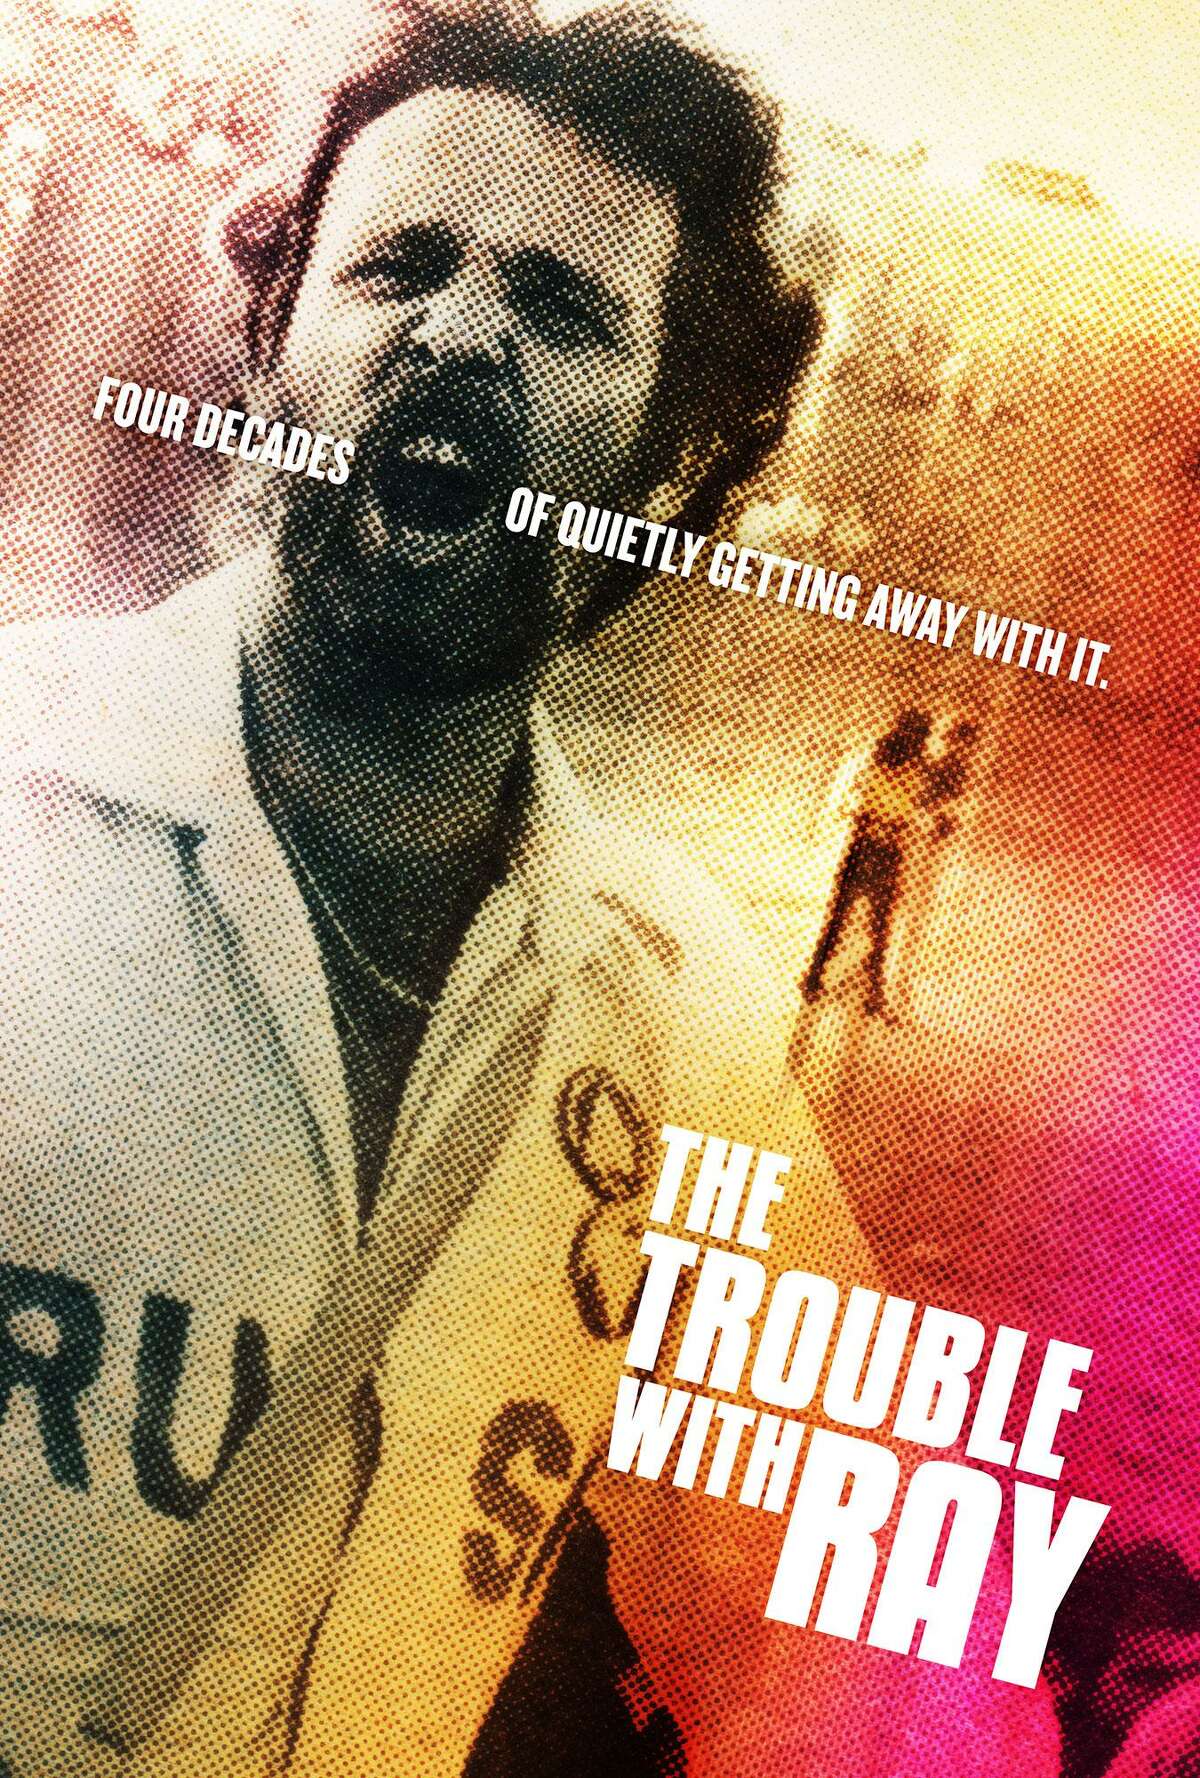 Poster for "The Trouble With Ray," a documentary focusing on Houston activist Ray Hill.